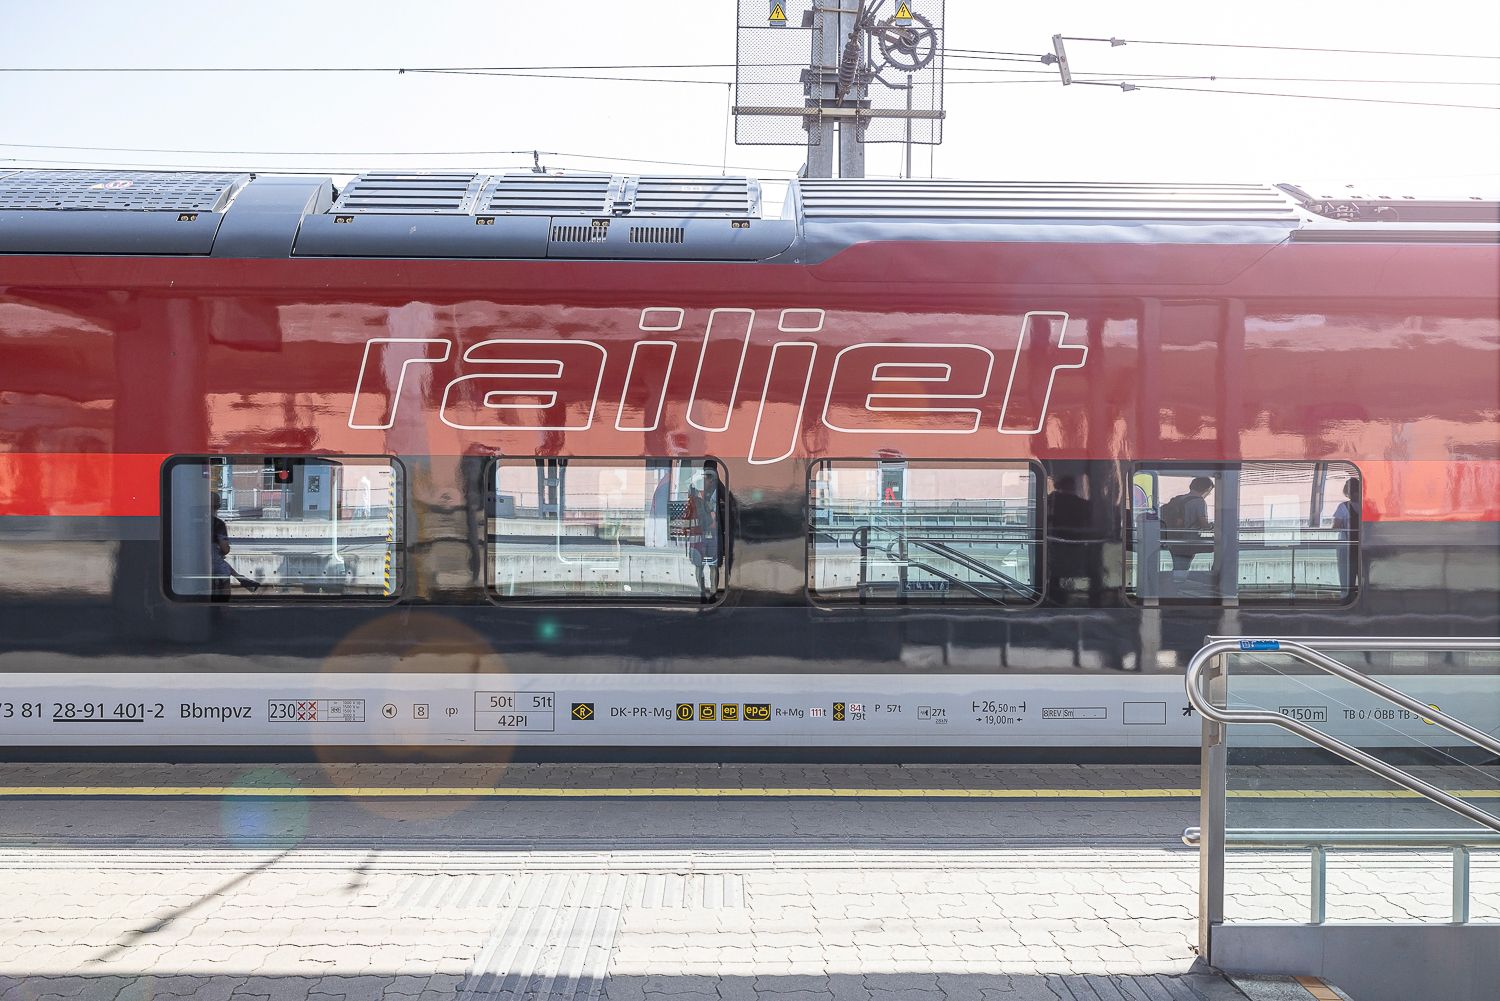 Austrian Federal Railways (ÖBB) has inaugurated service for the first Railjet of the new generation from Siemens Mobility